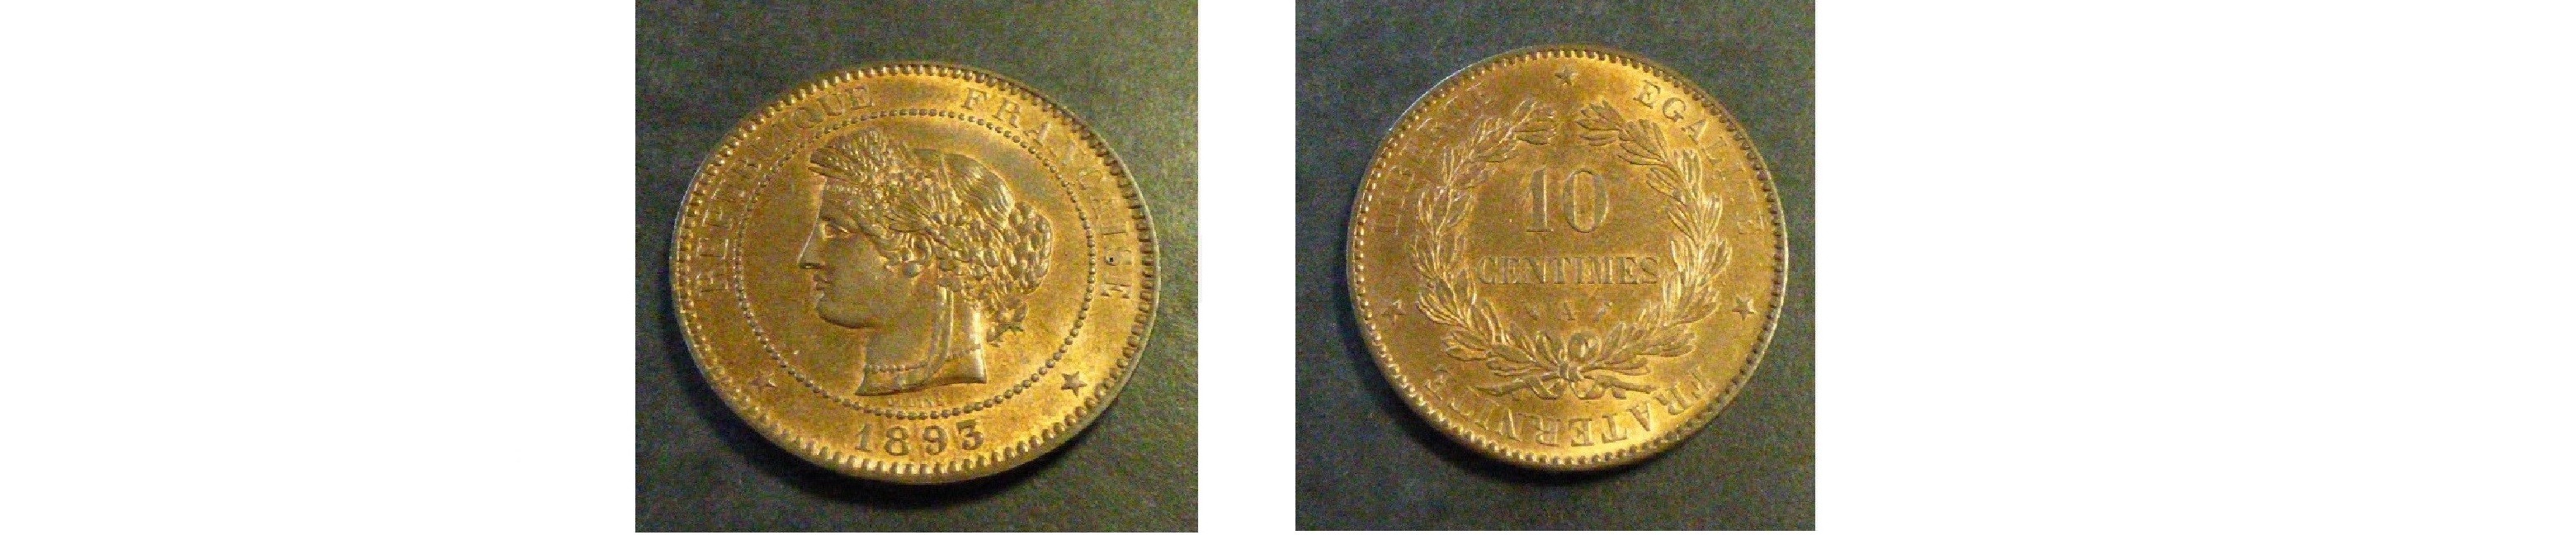 FRANCE 10 CENTS 1893 BRONZE 10G (SUP+/XF+/VZ+)